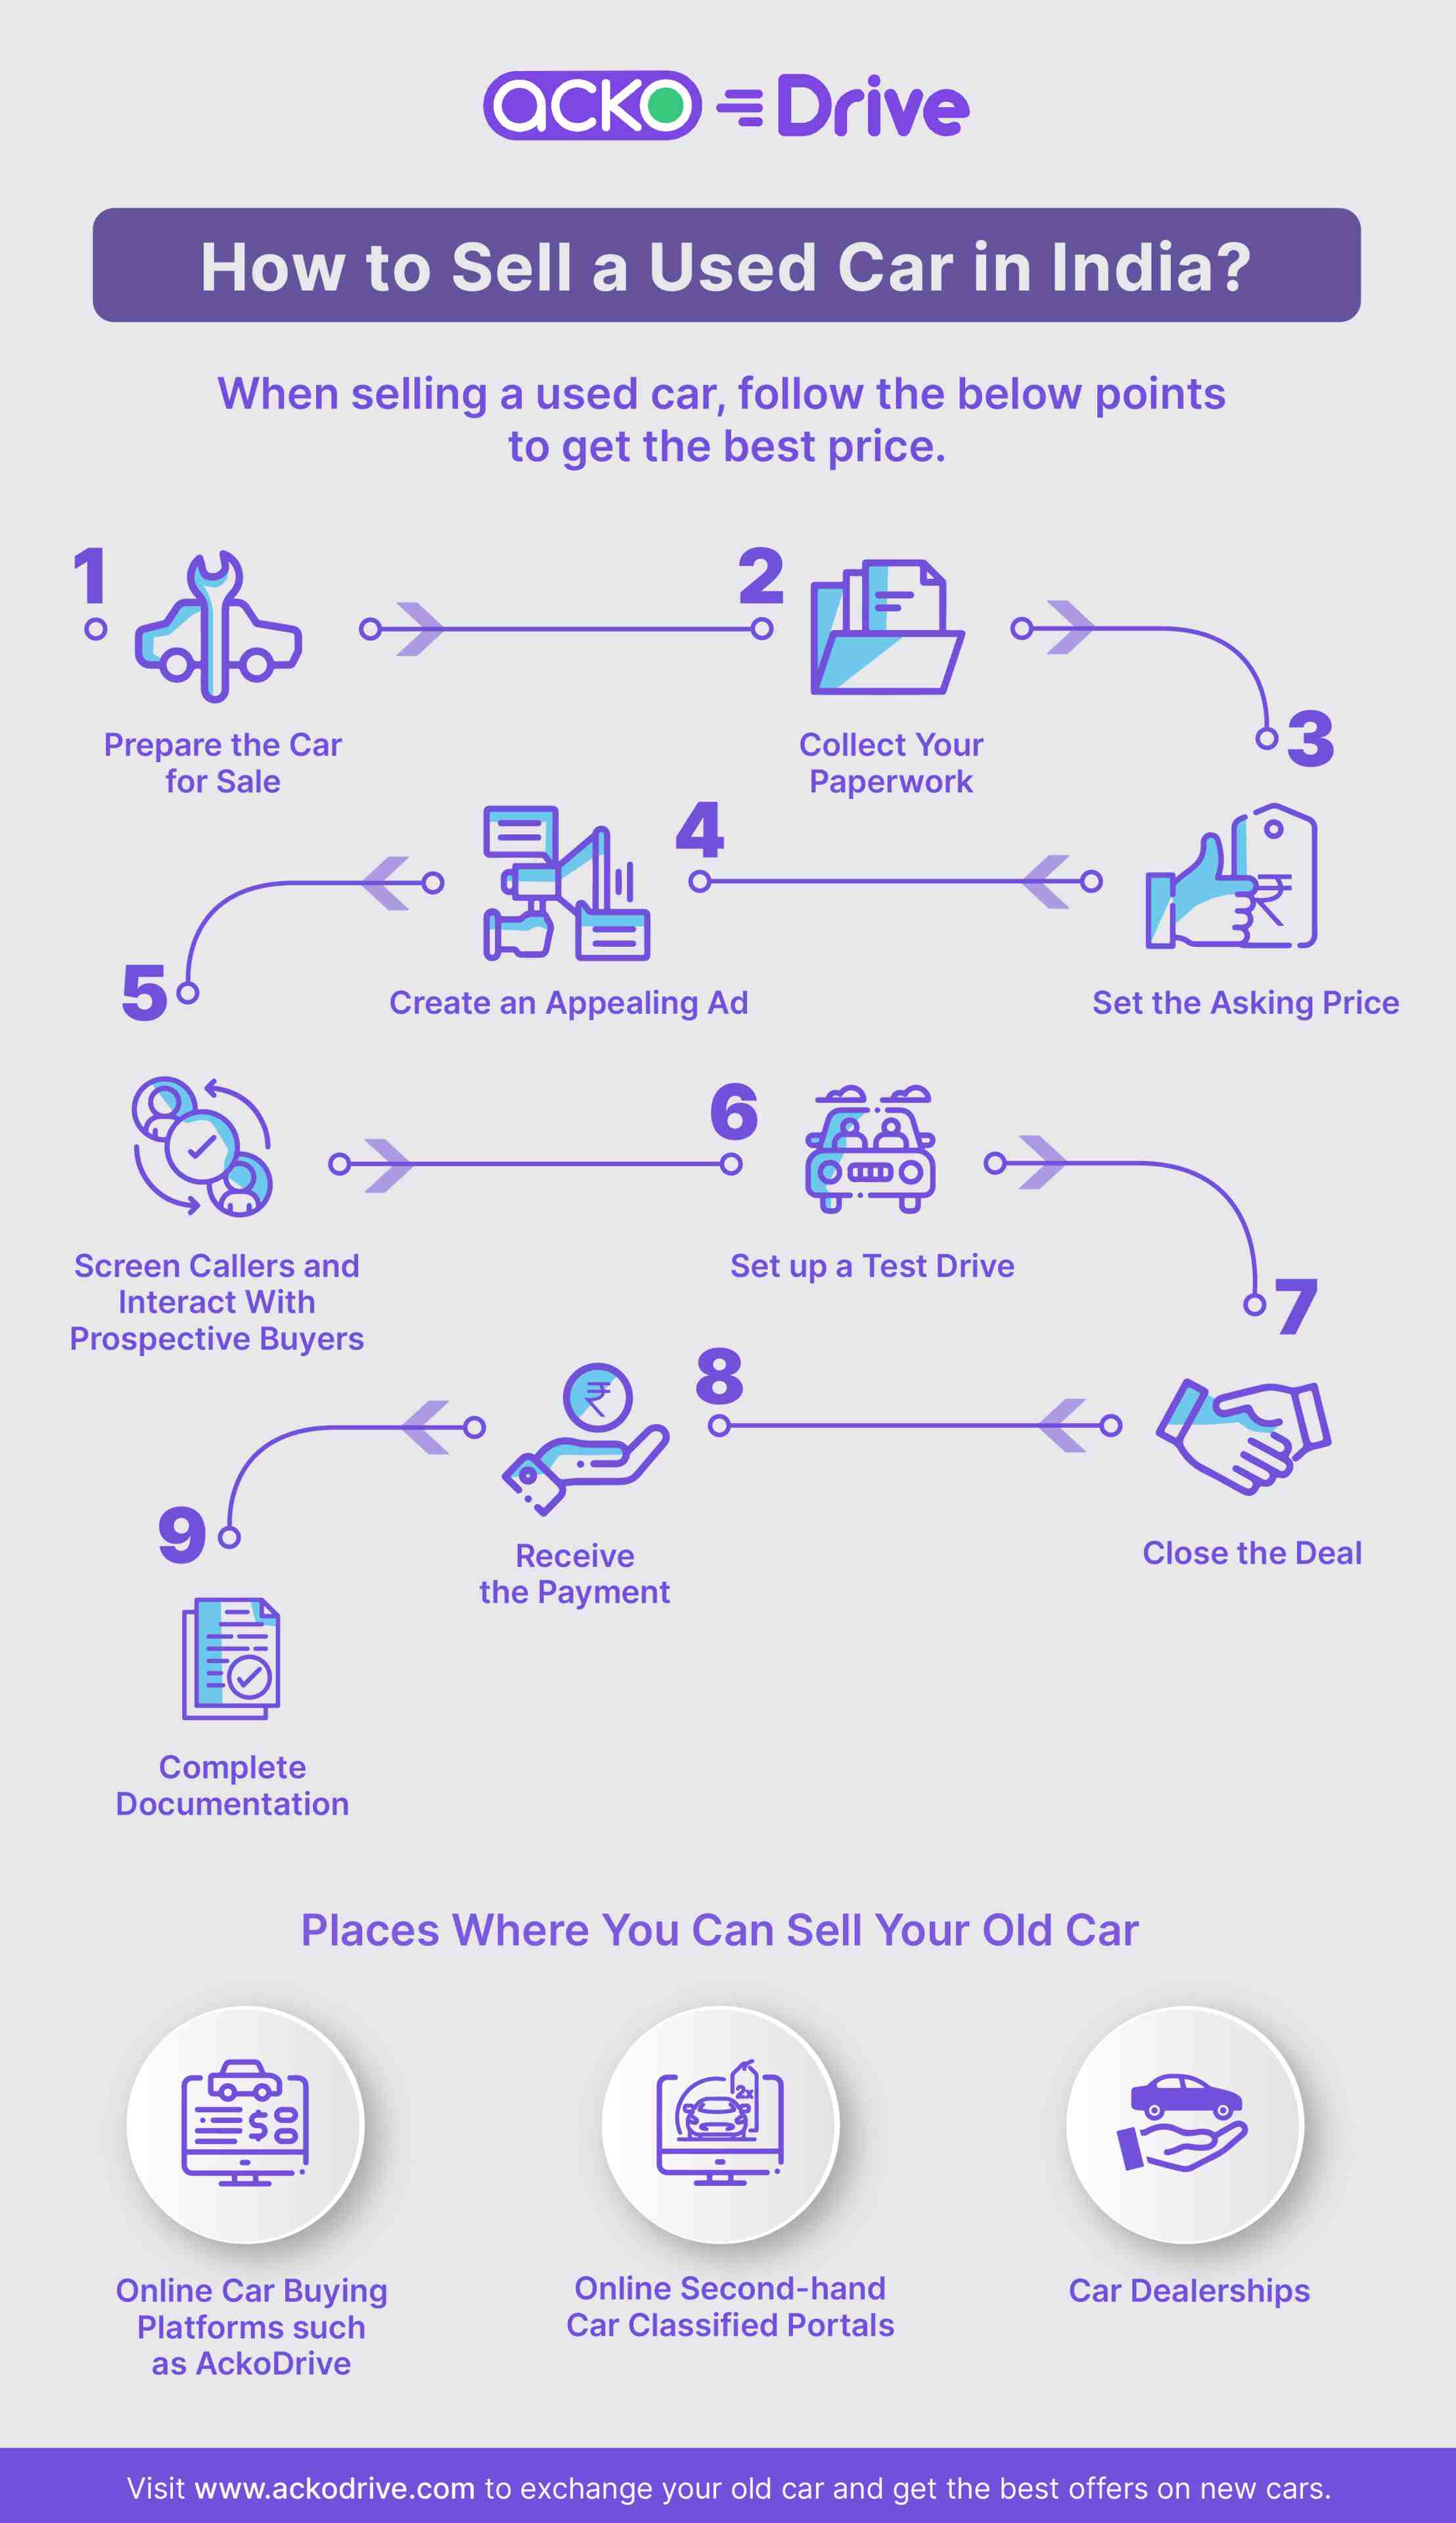 How to Sell a Used Car in India - Infographic